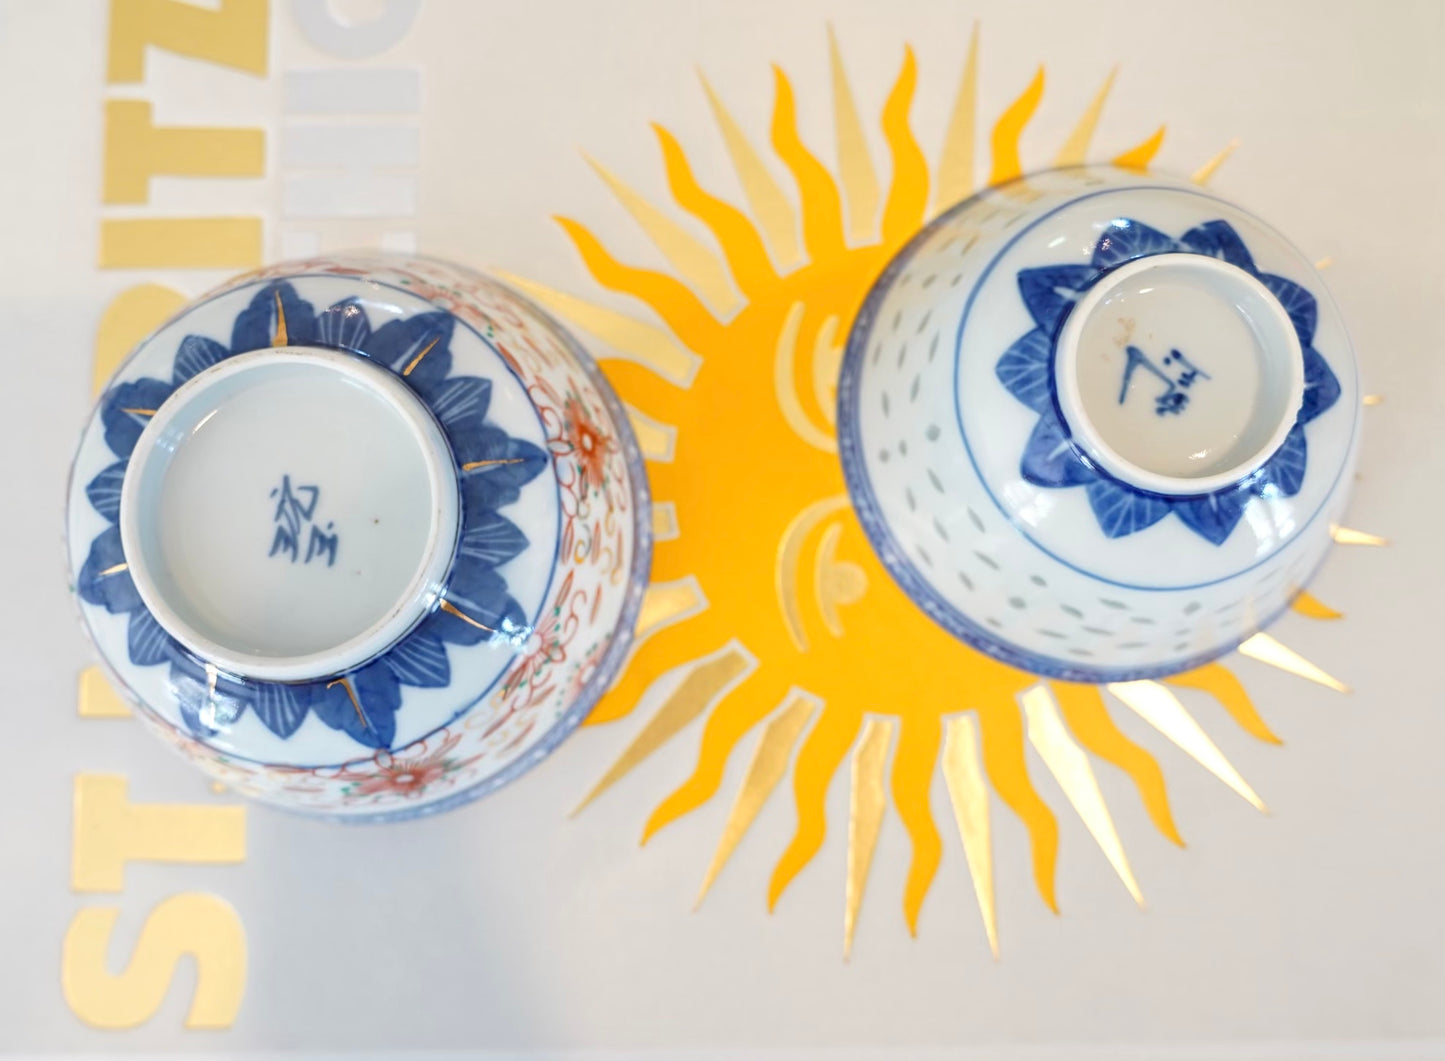 PAIR OF BLUE & WHITE ORIENTAL ACCENT BOWLS